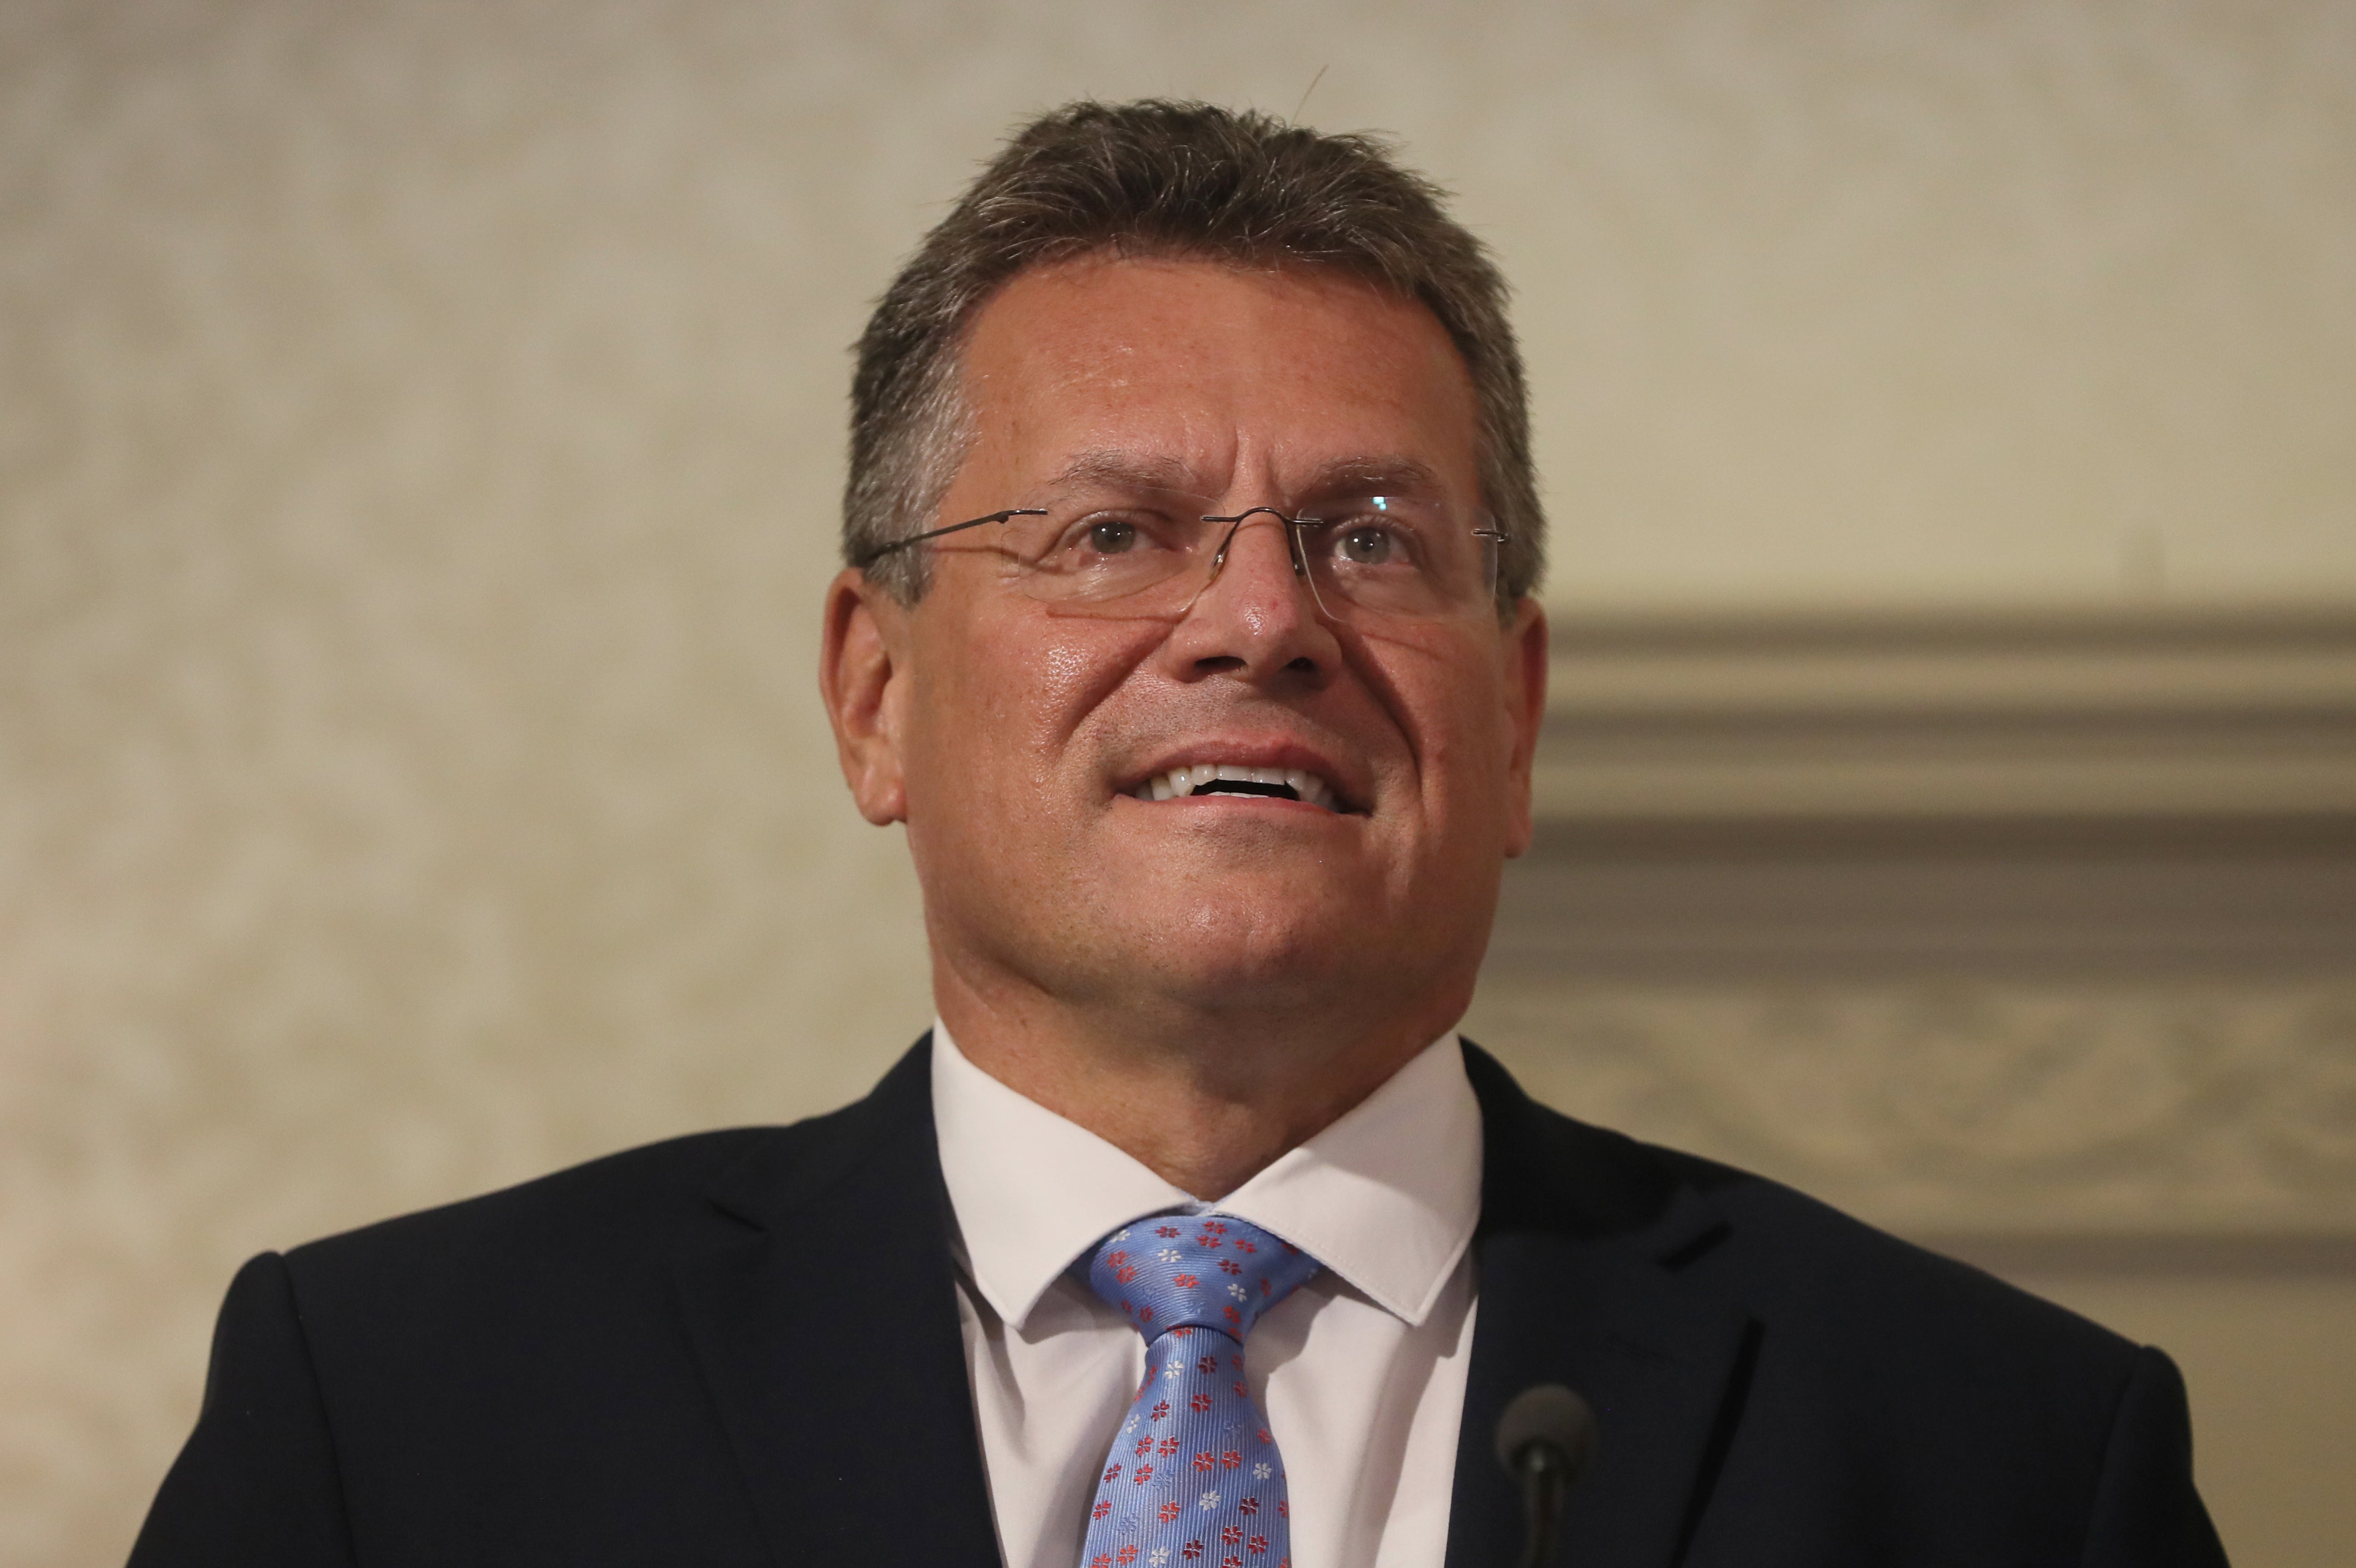 European Commission Vice President Maros Sefcovic during a press conference at the Crowne Plaza hotel, Belfast, at the end of his two-day visit to Northern Ireland. Picture date: Friday September 10, 2021.